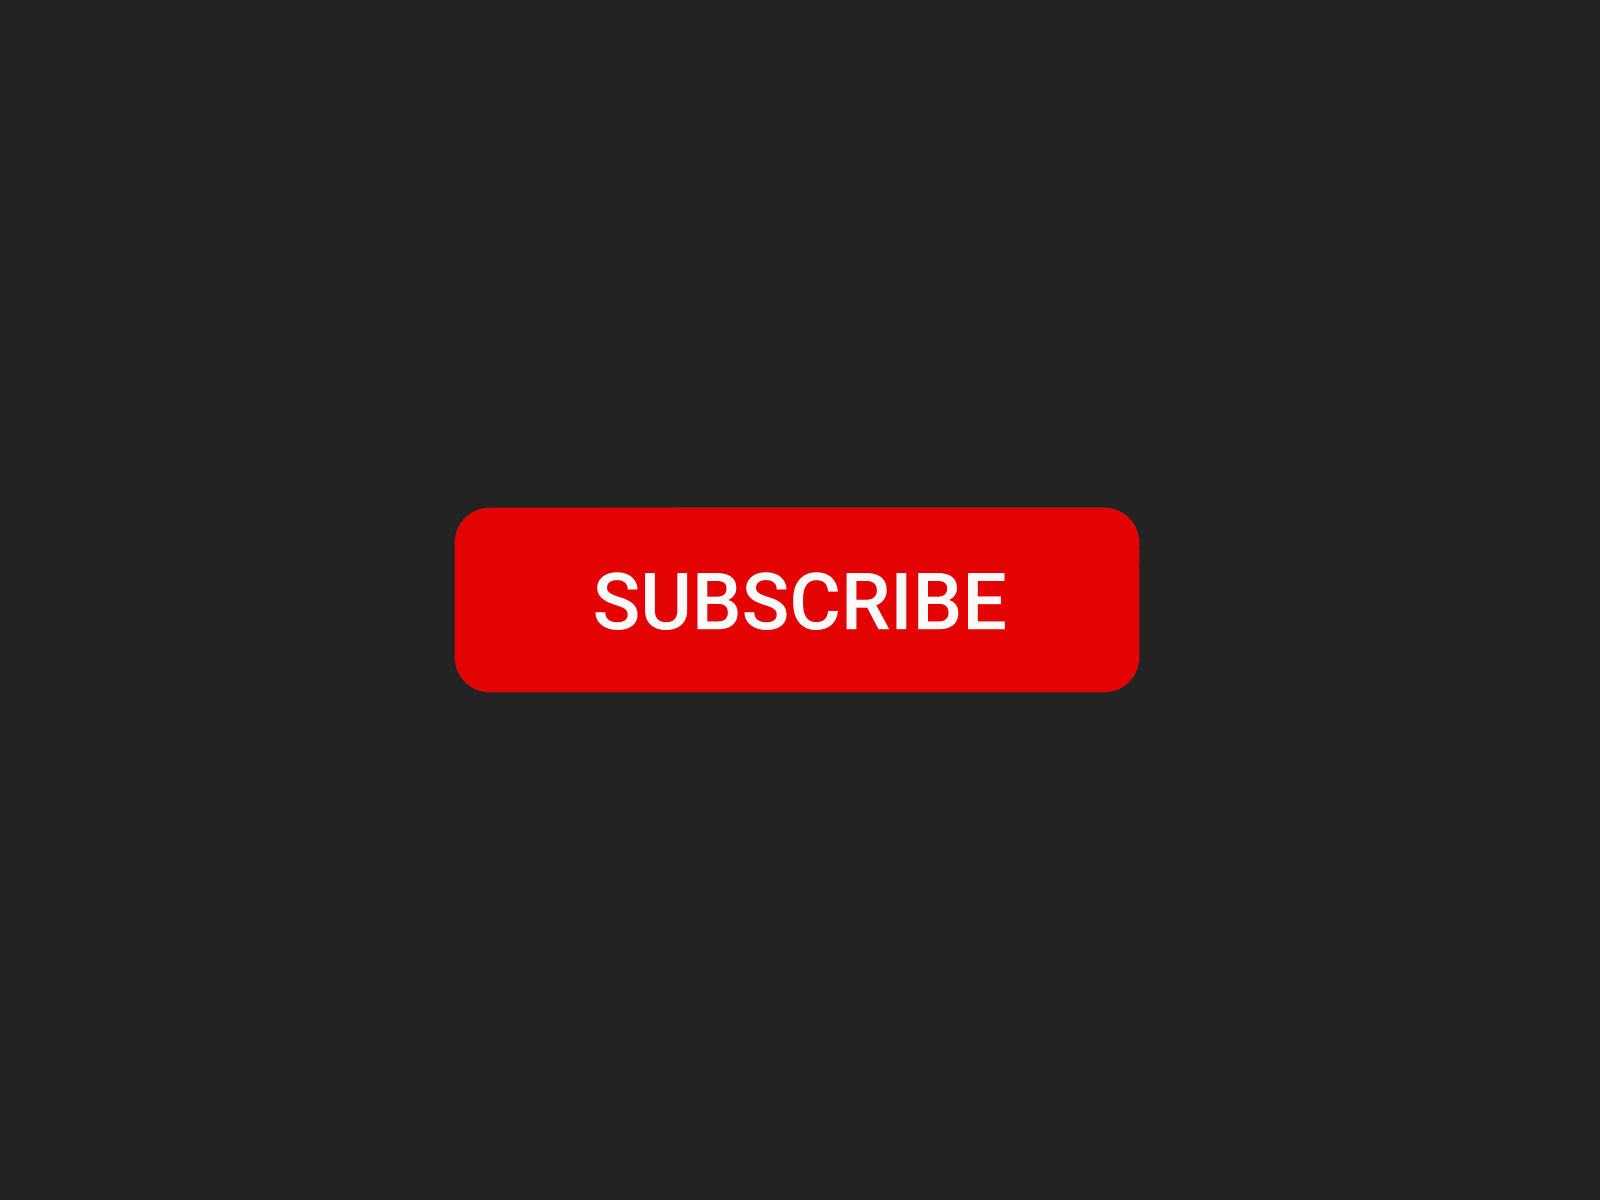 Free and customizable subscribe templates